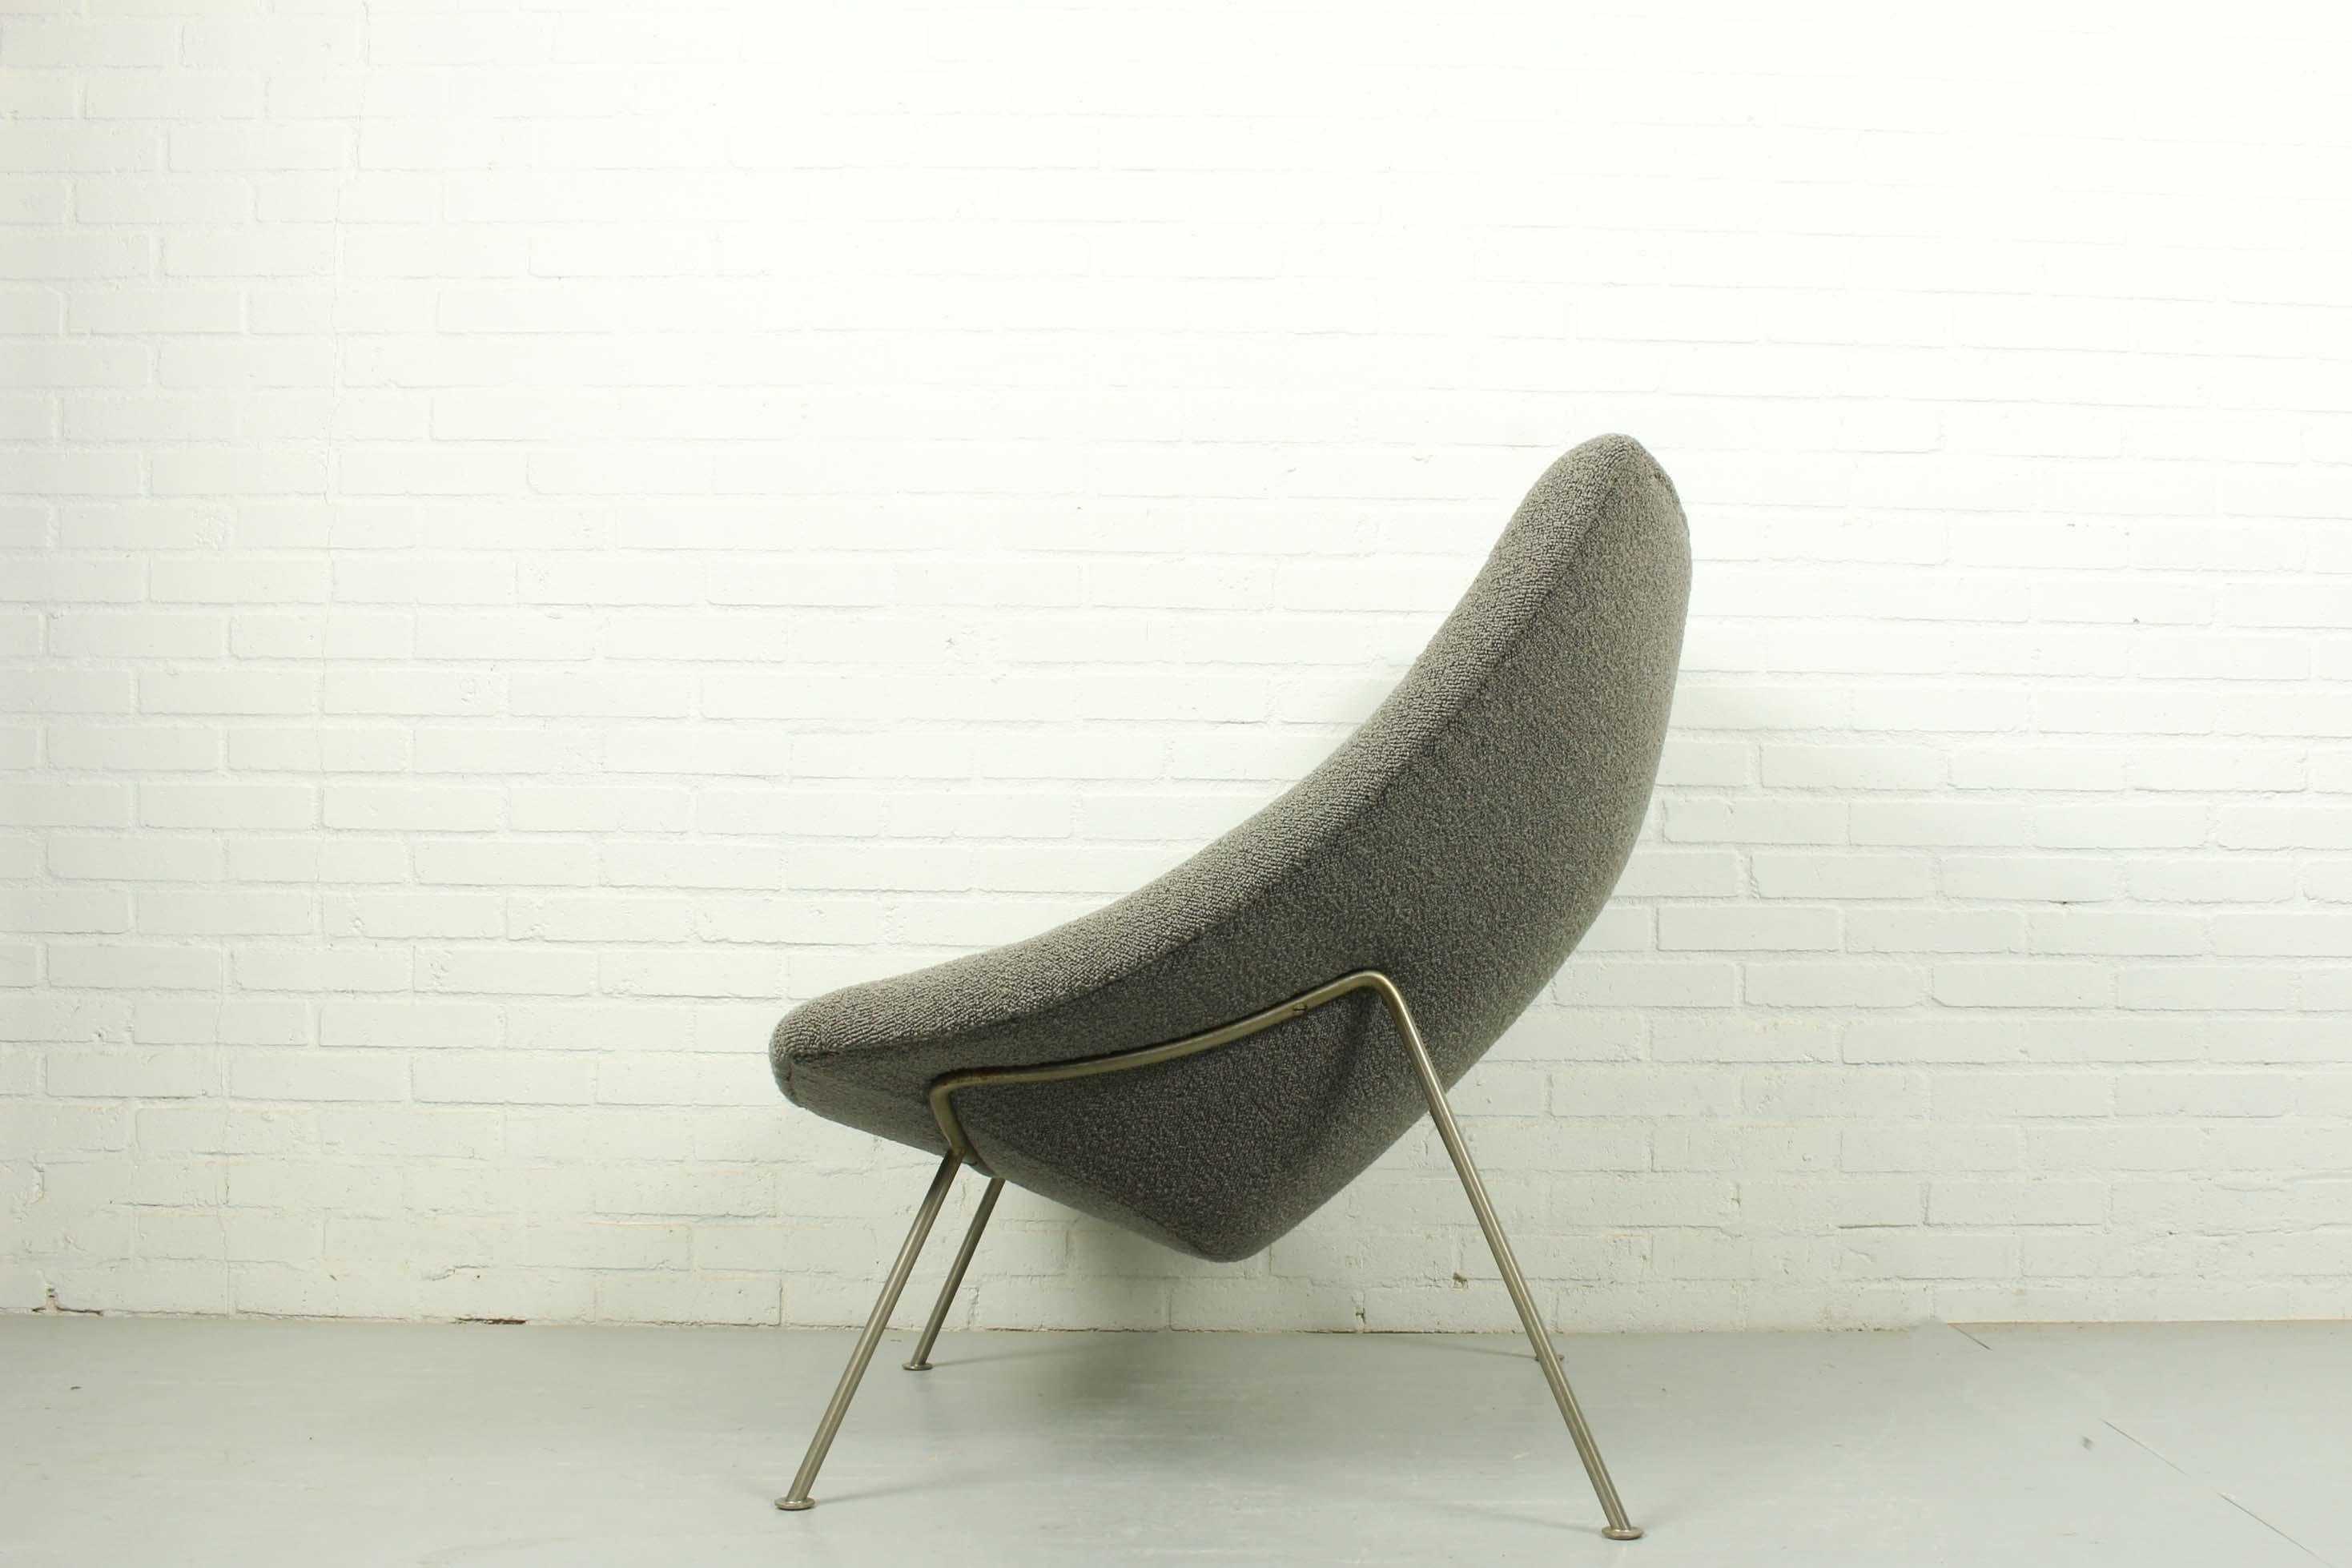 Model Oyster lounge chair by Pierre Paulin for Artifort, Netherlands, Shell covered with foam and upholstered in a beautiful dark grey fabric (De Ploeg). Base made of nickel-plated steel rods.